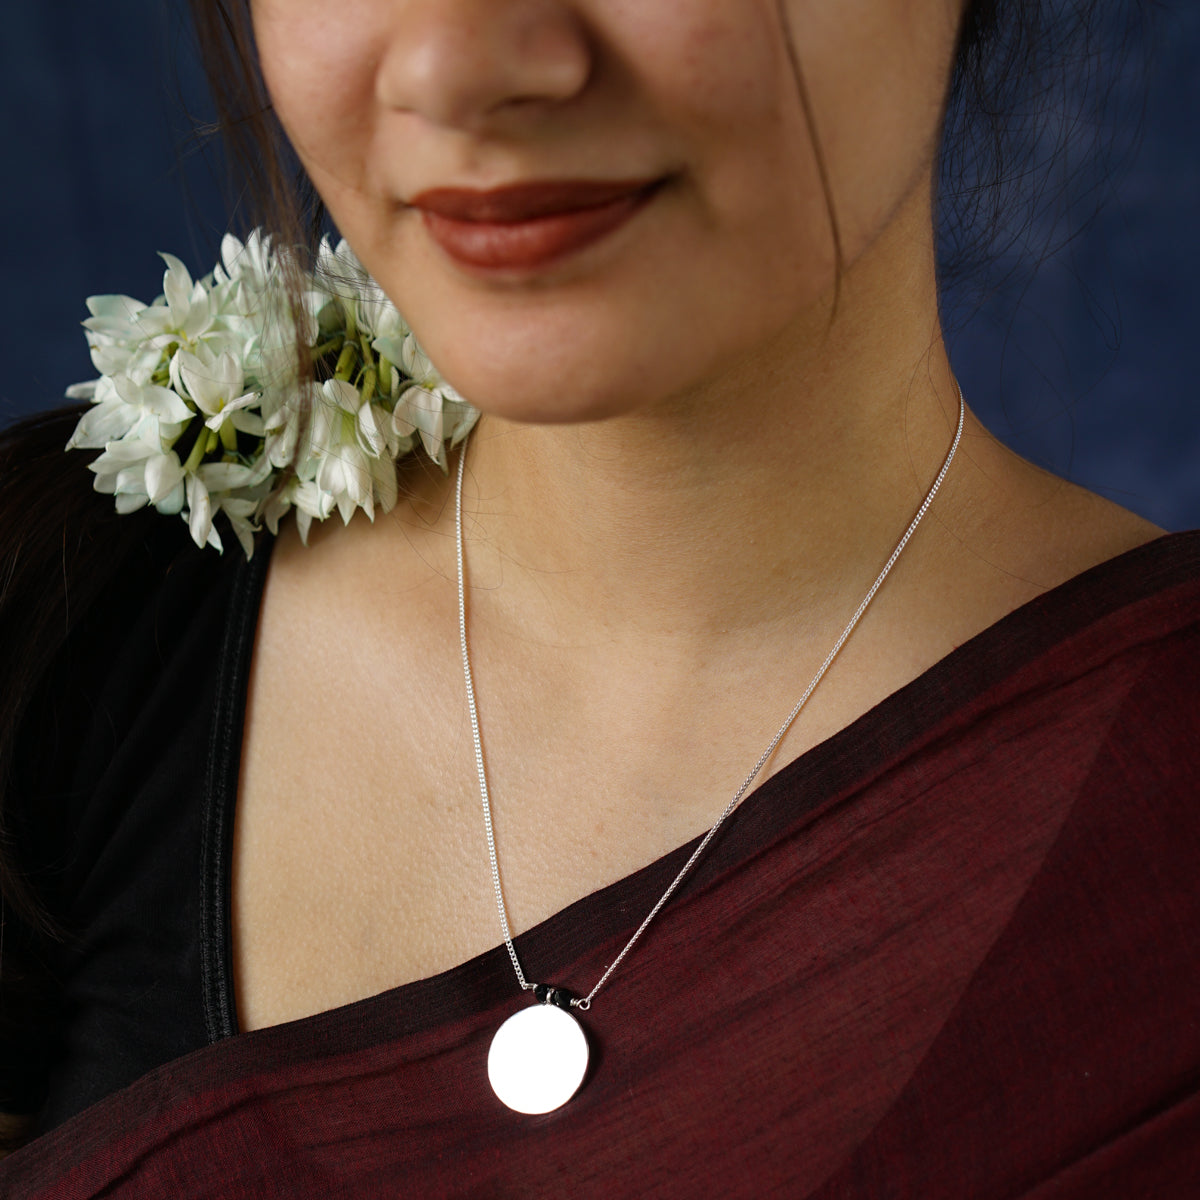 a woman wearing a necklace with a flower on it